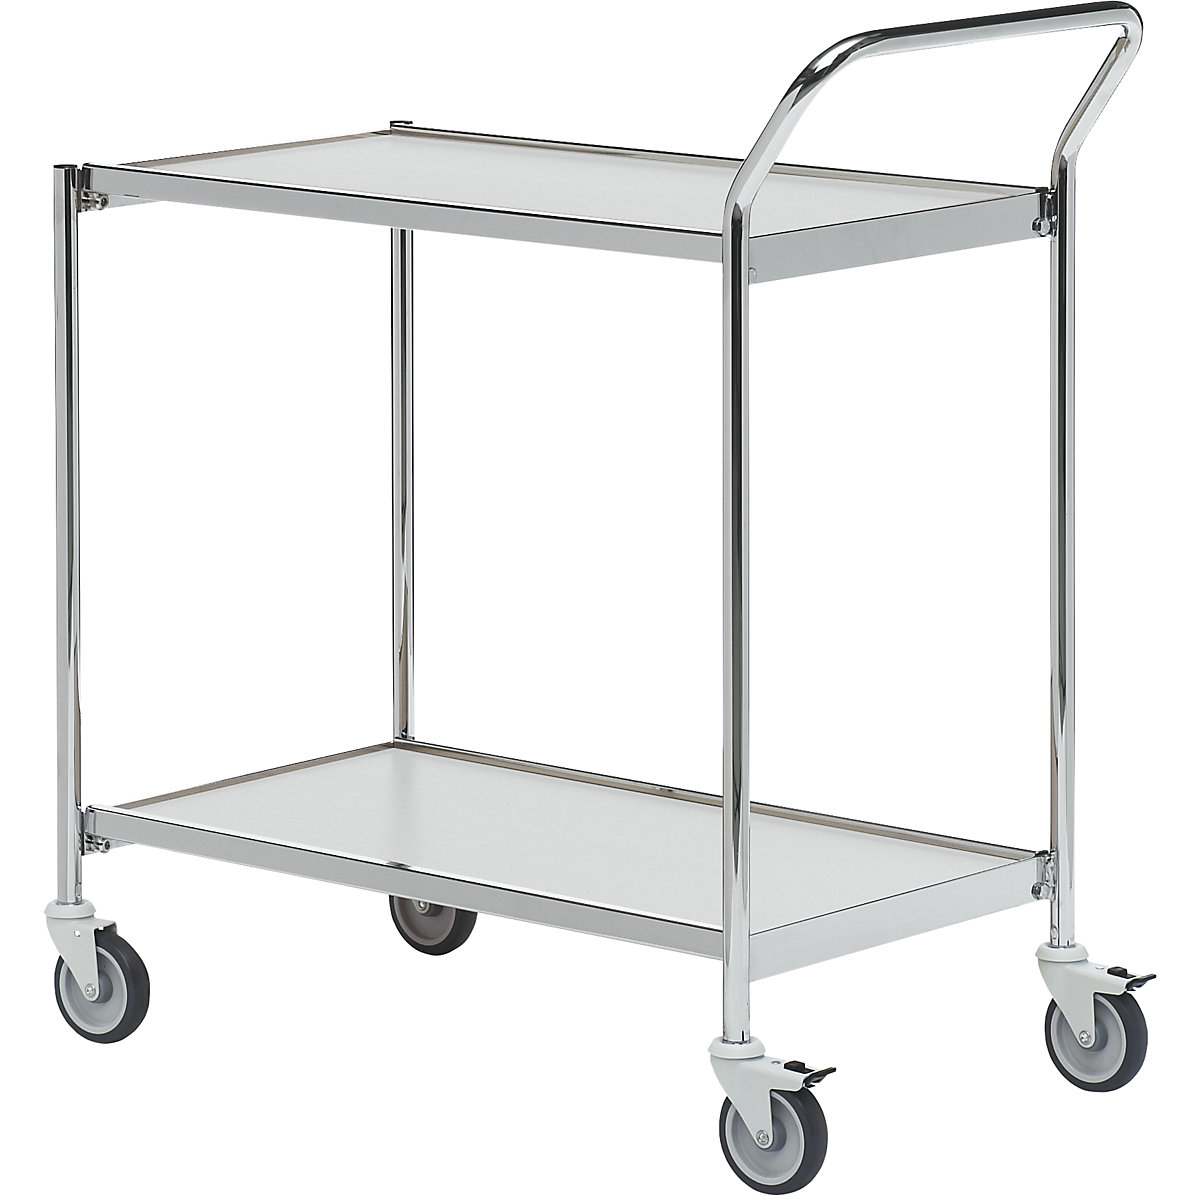 Table trolley – HelgeNyberg, 2 shelves, LxW 800 x 420 mm, chrome/grey, 5+ items-8